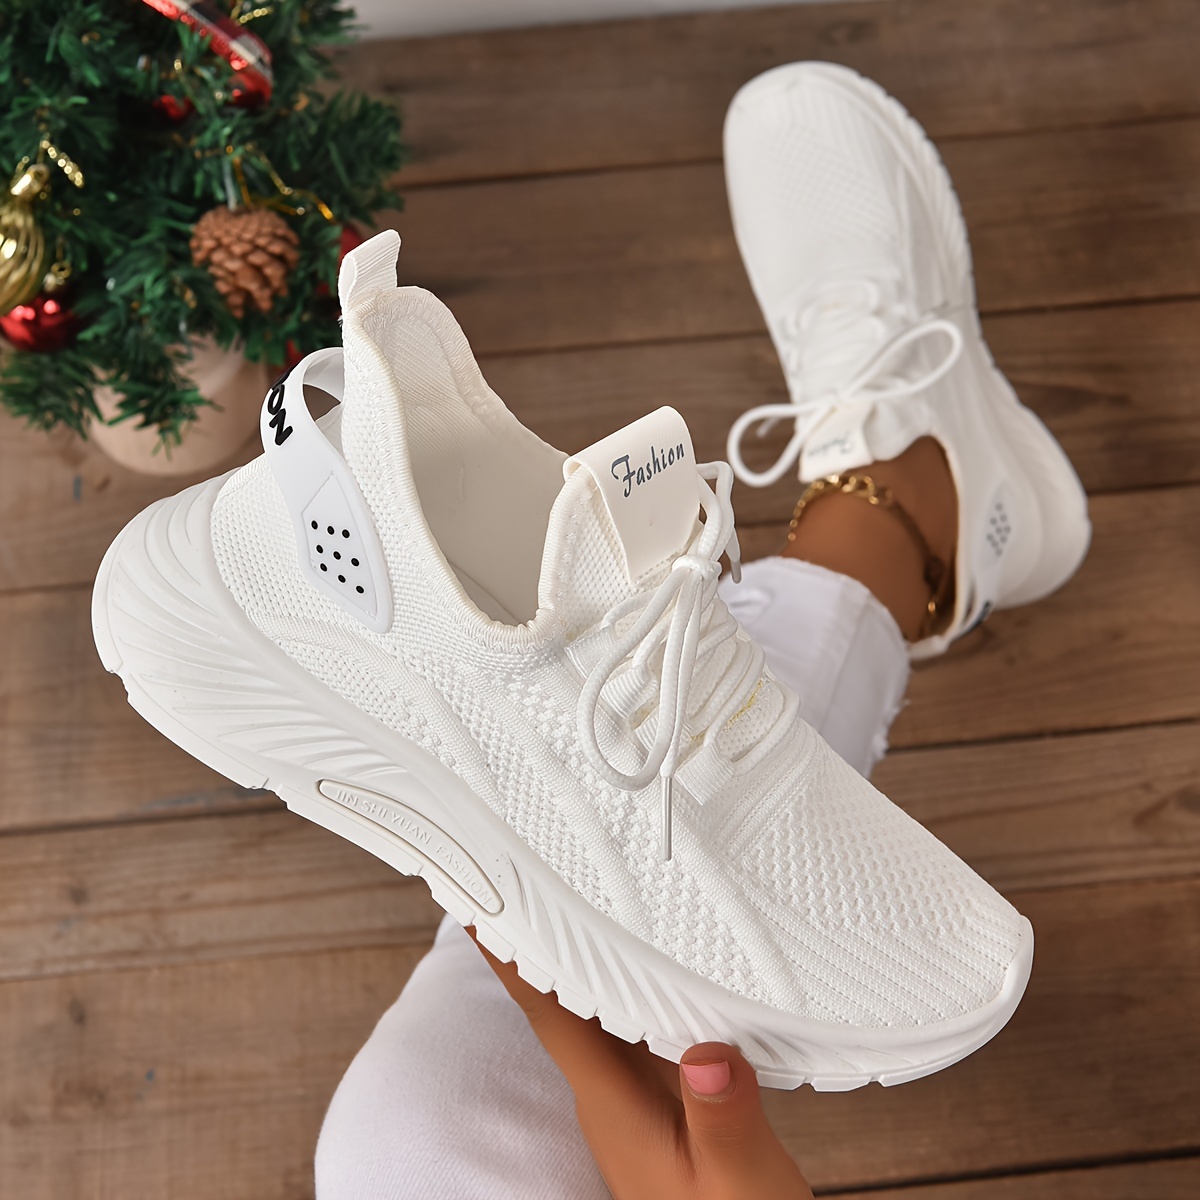 Women's Minimalist Solid Color Sneakers, Lace Up Low-top Round Toe  Lightweight Non-slip Shoes, Comfy Classic White Shoes